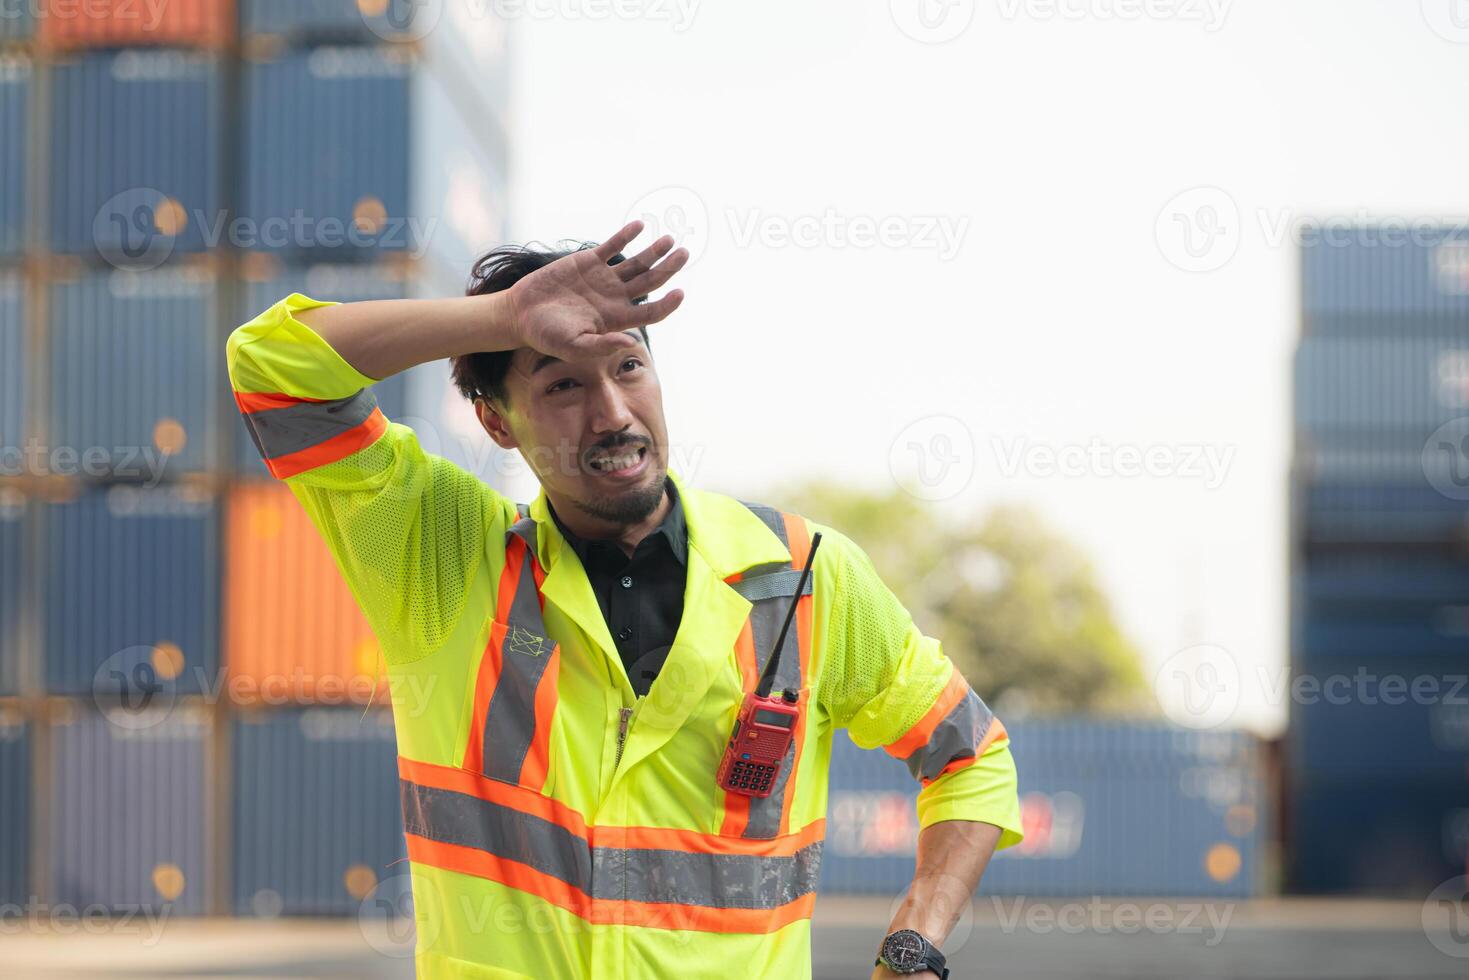 Portrait of an Asian male worker wearing a safety vest and hard hat, taking a break from work with a container box in the background photo